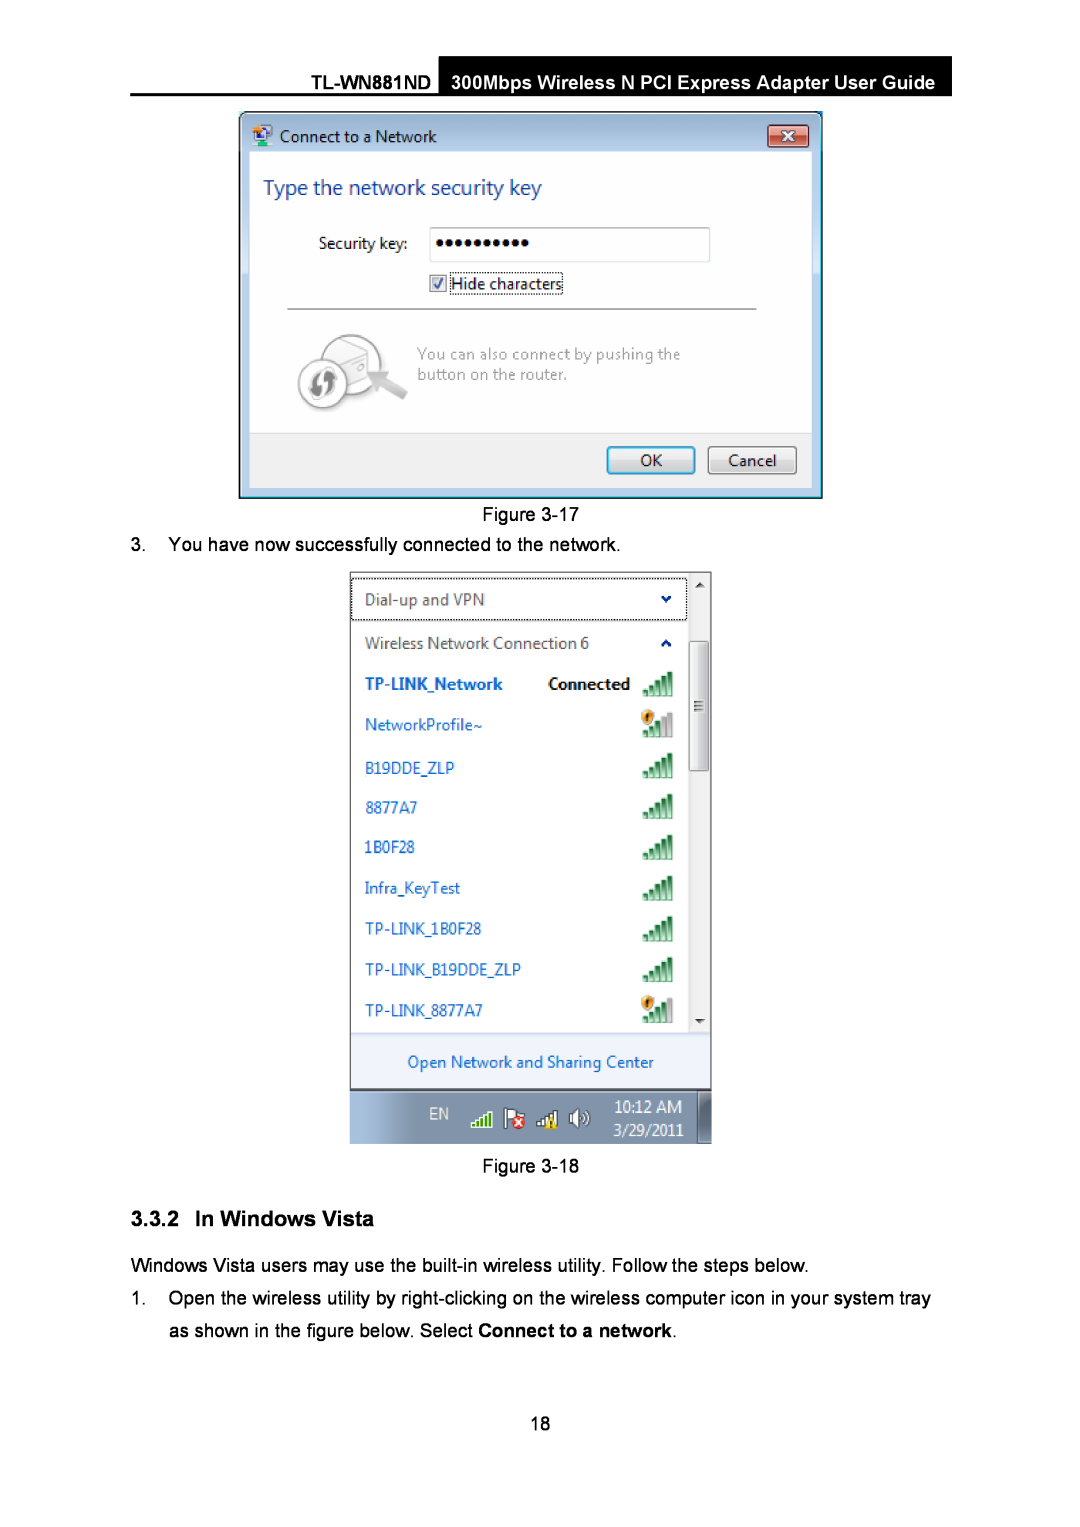 TP-Link manual In Windows Vista, TL-WN881ND 300Mbps Wireless N PCI Express Adapter User Guide 